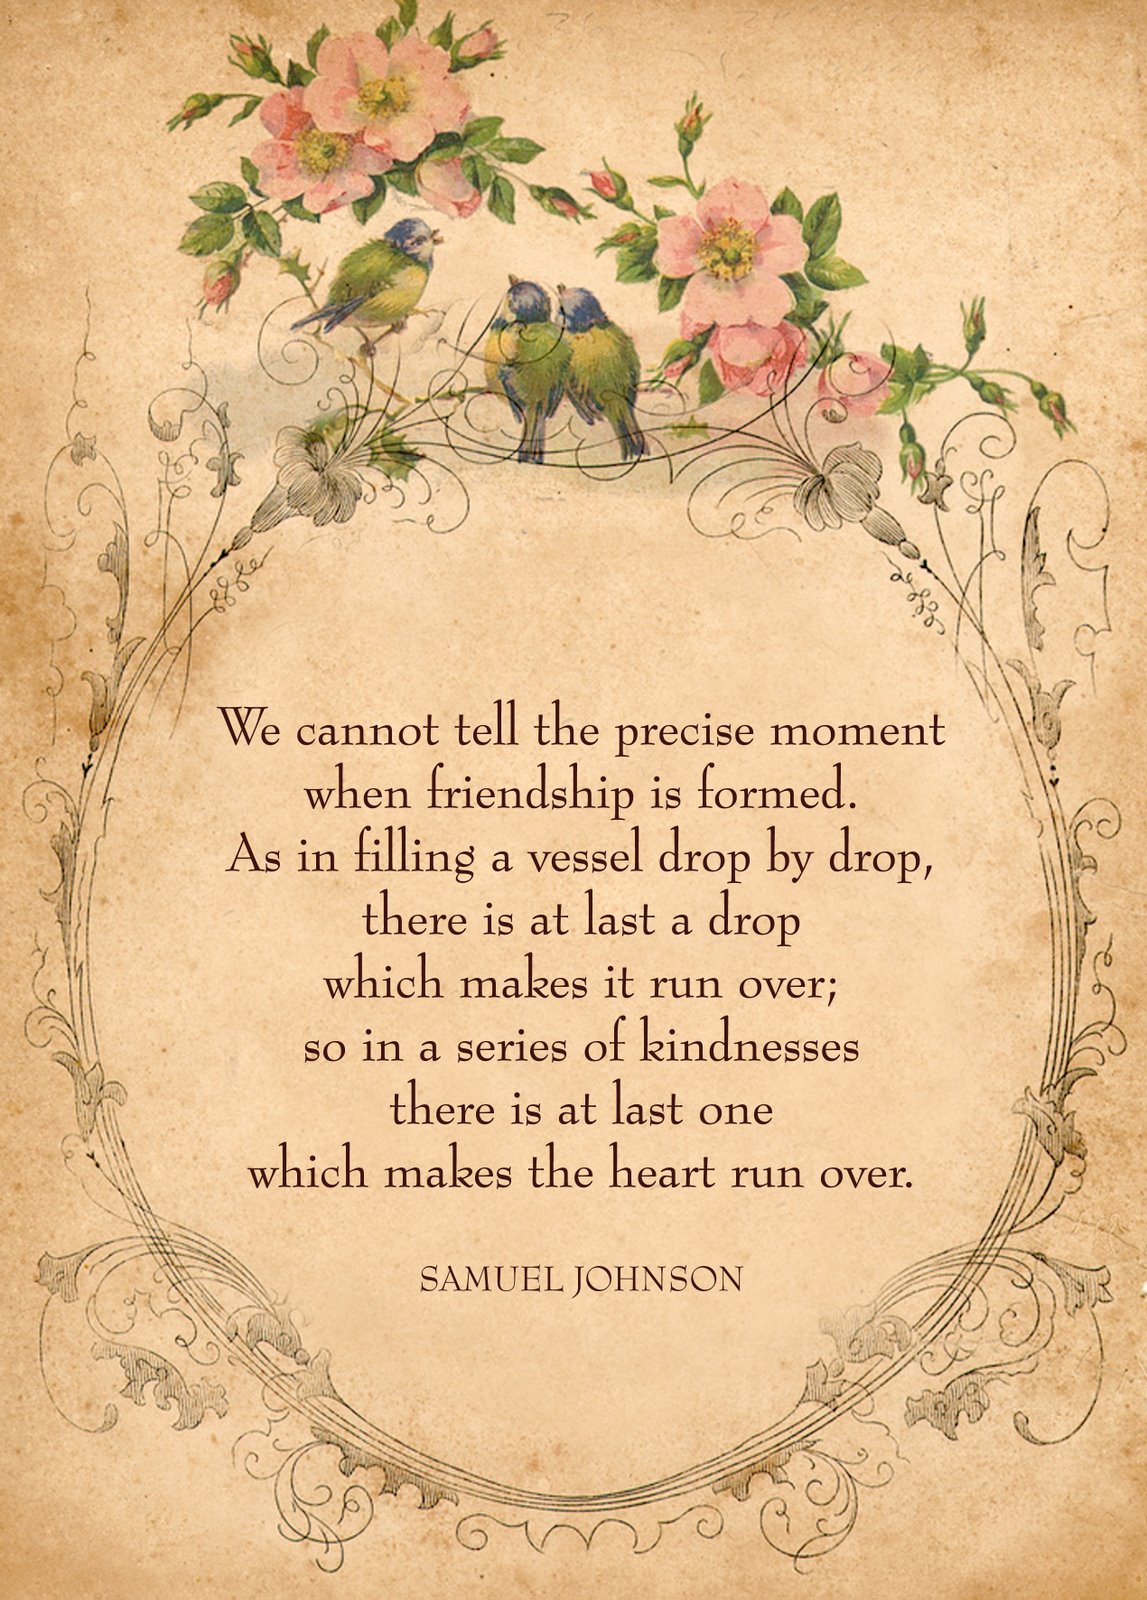 The Feathered Nest ~: Thoughts on precious friendship